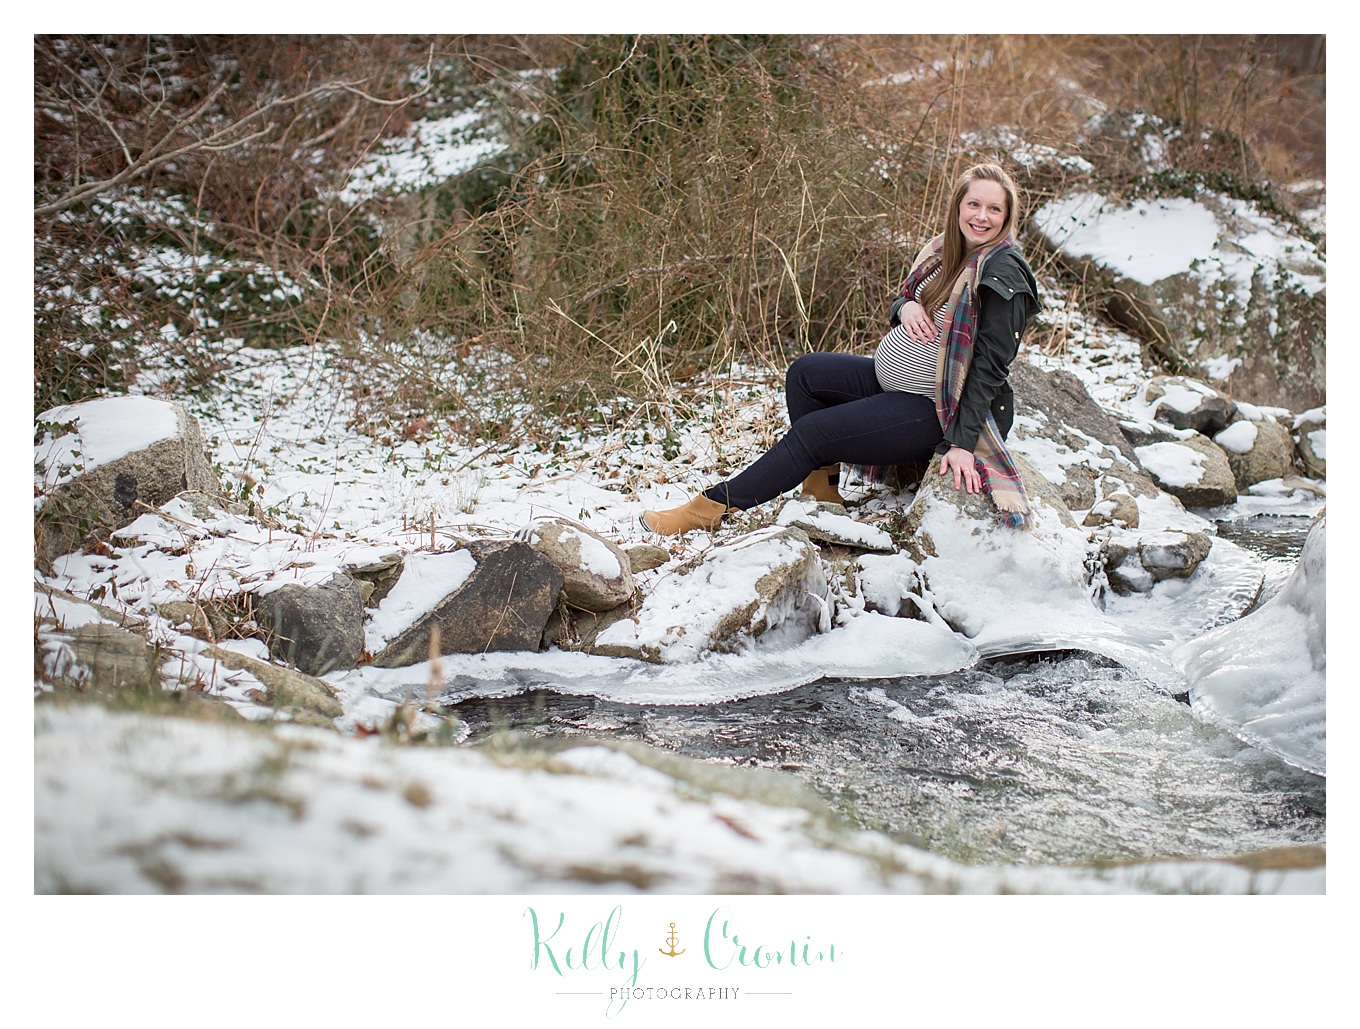 A pregnant woman lays in the snow | Kelly Cronin Photography | Cape Cod Maternity Photographer